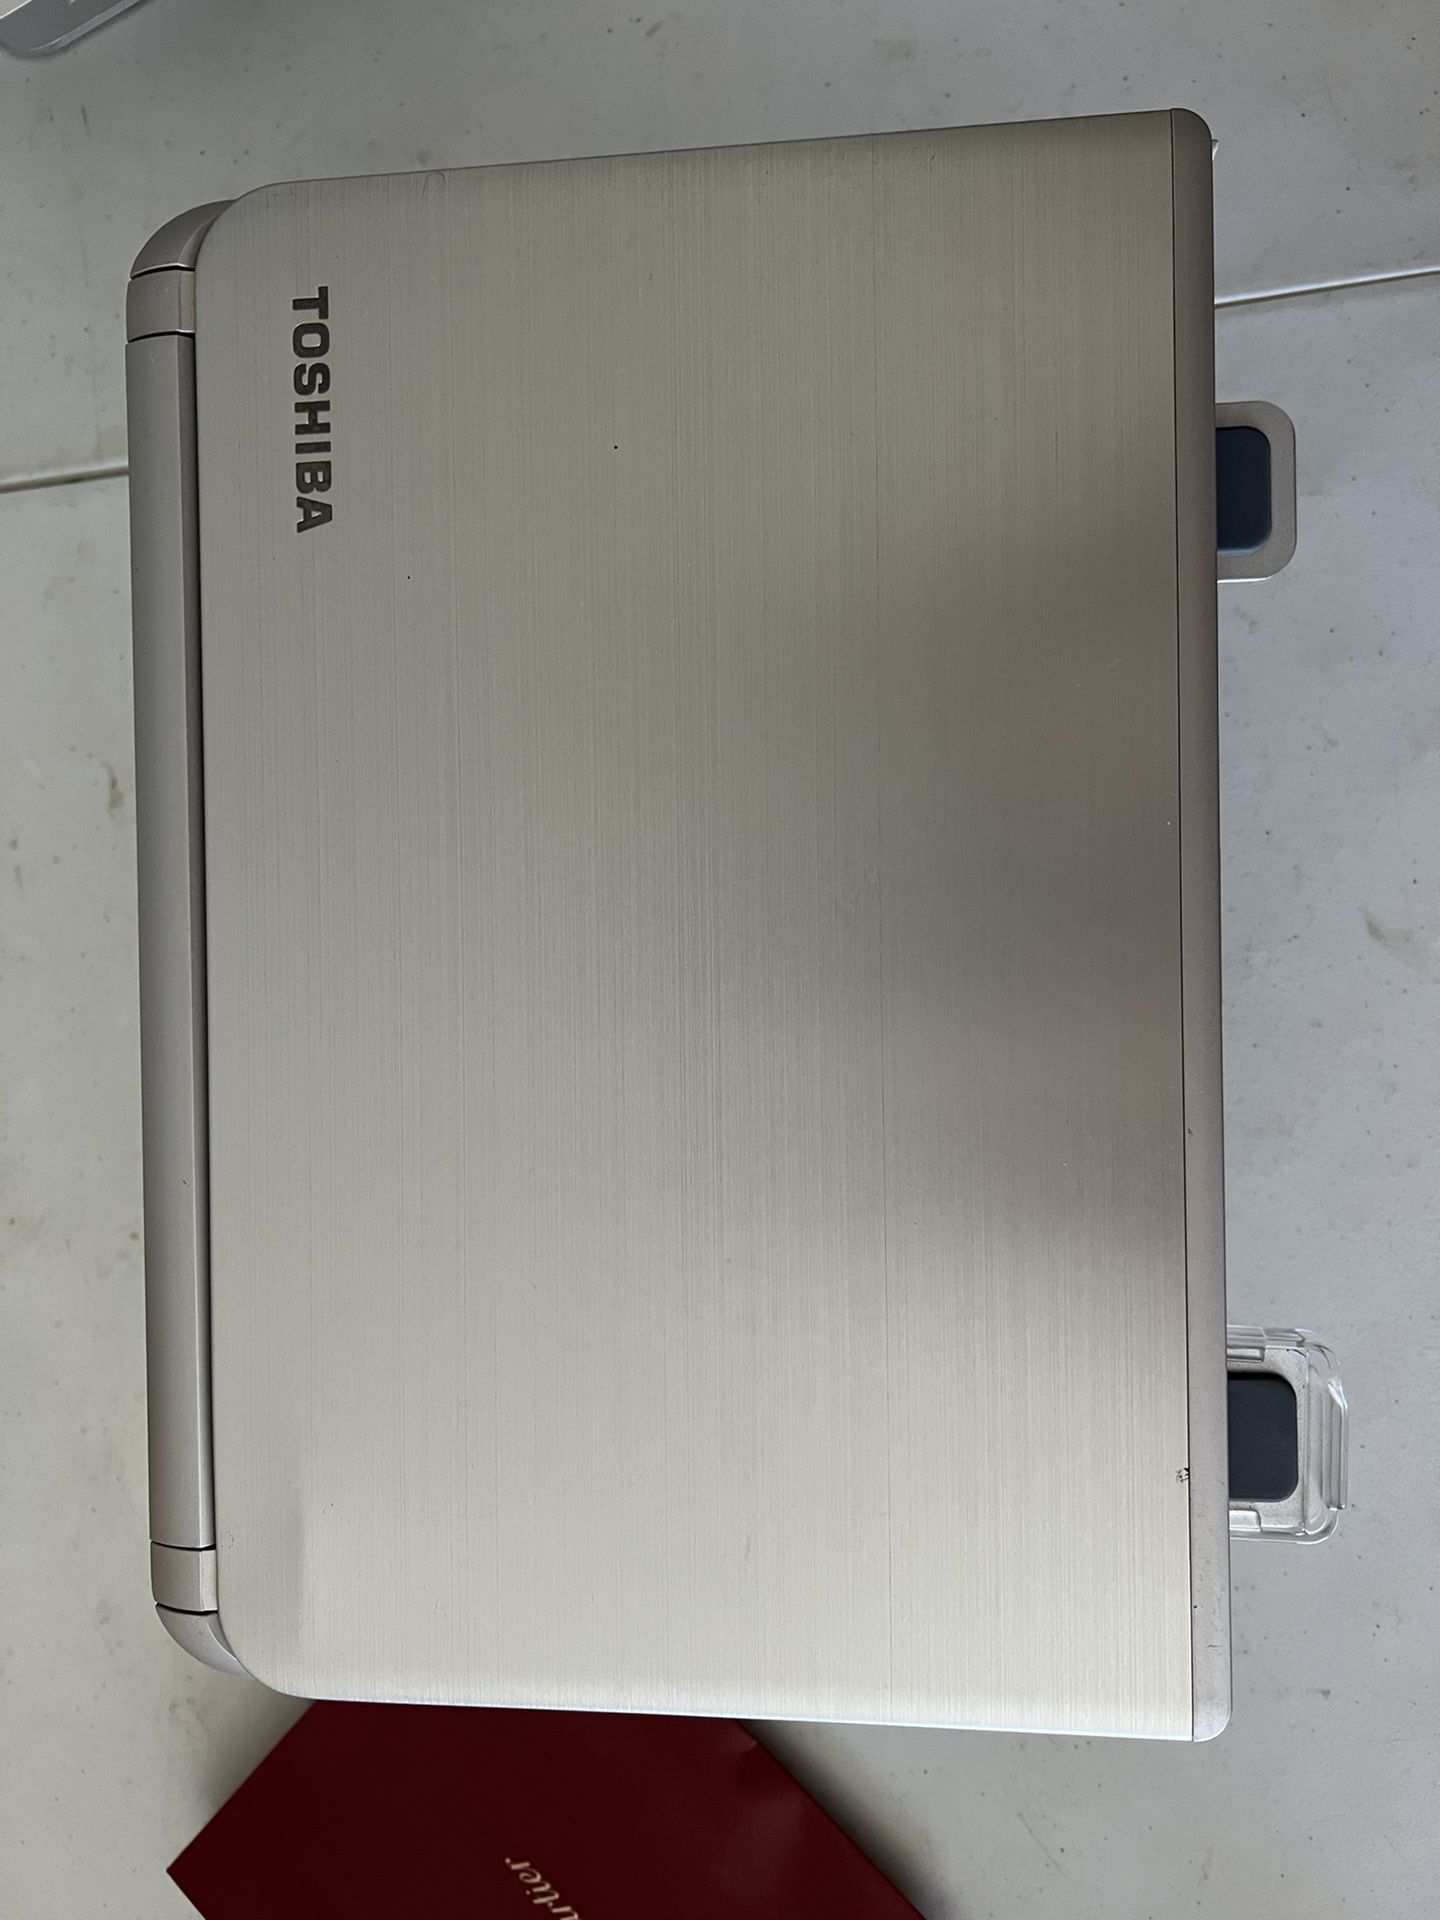 Toshiba Laptop Selling For Parts 